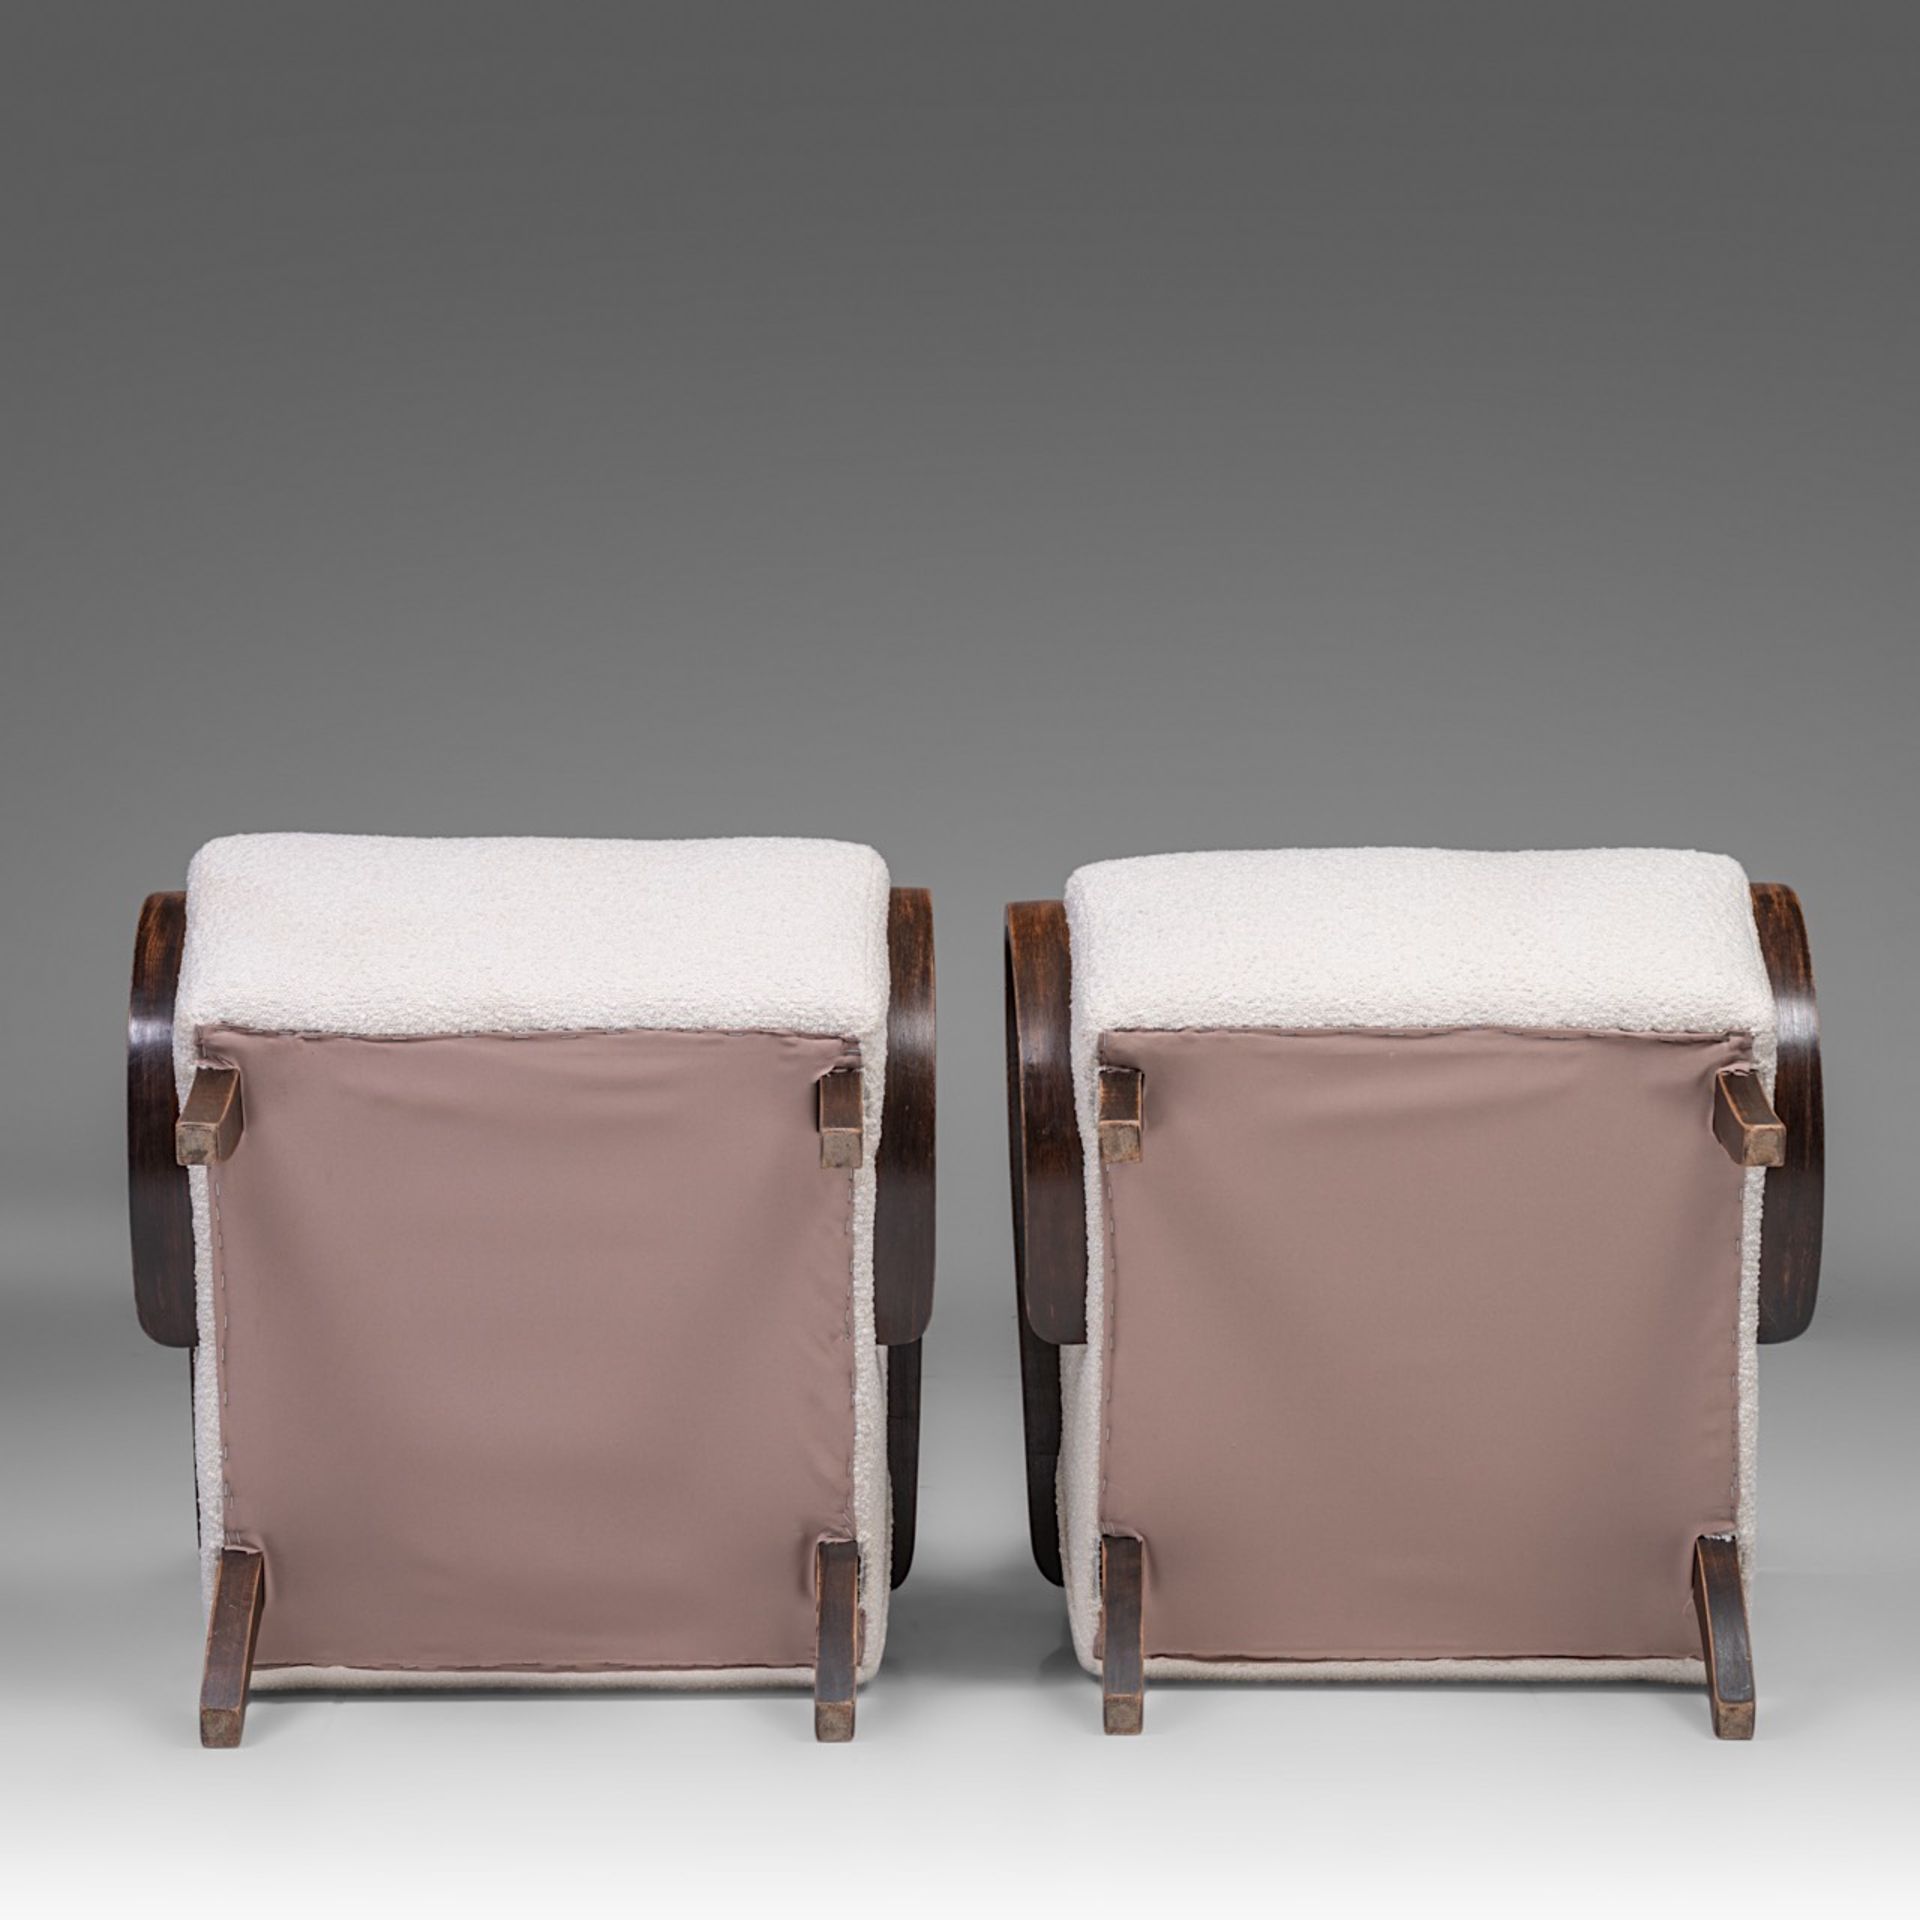 A pair of Mid-century Armchairs by Jindrich Halabala, 1950s 83 x 68 x 87 cm. (32.6 x 26.7 x 34 1/4 i - Image 8 of 13